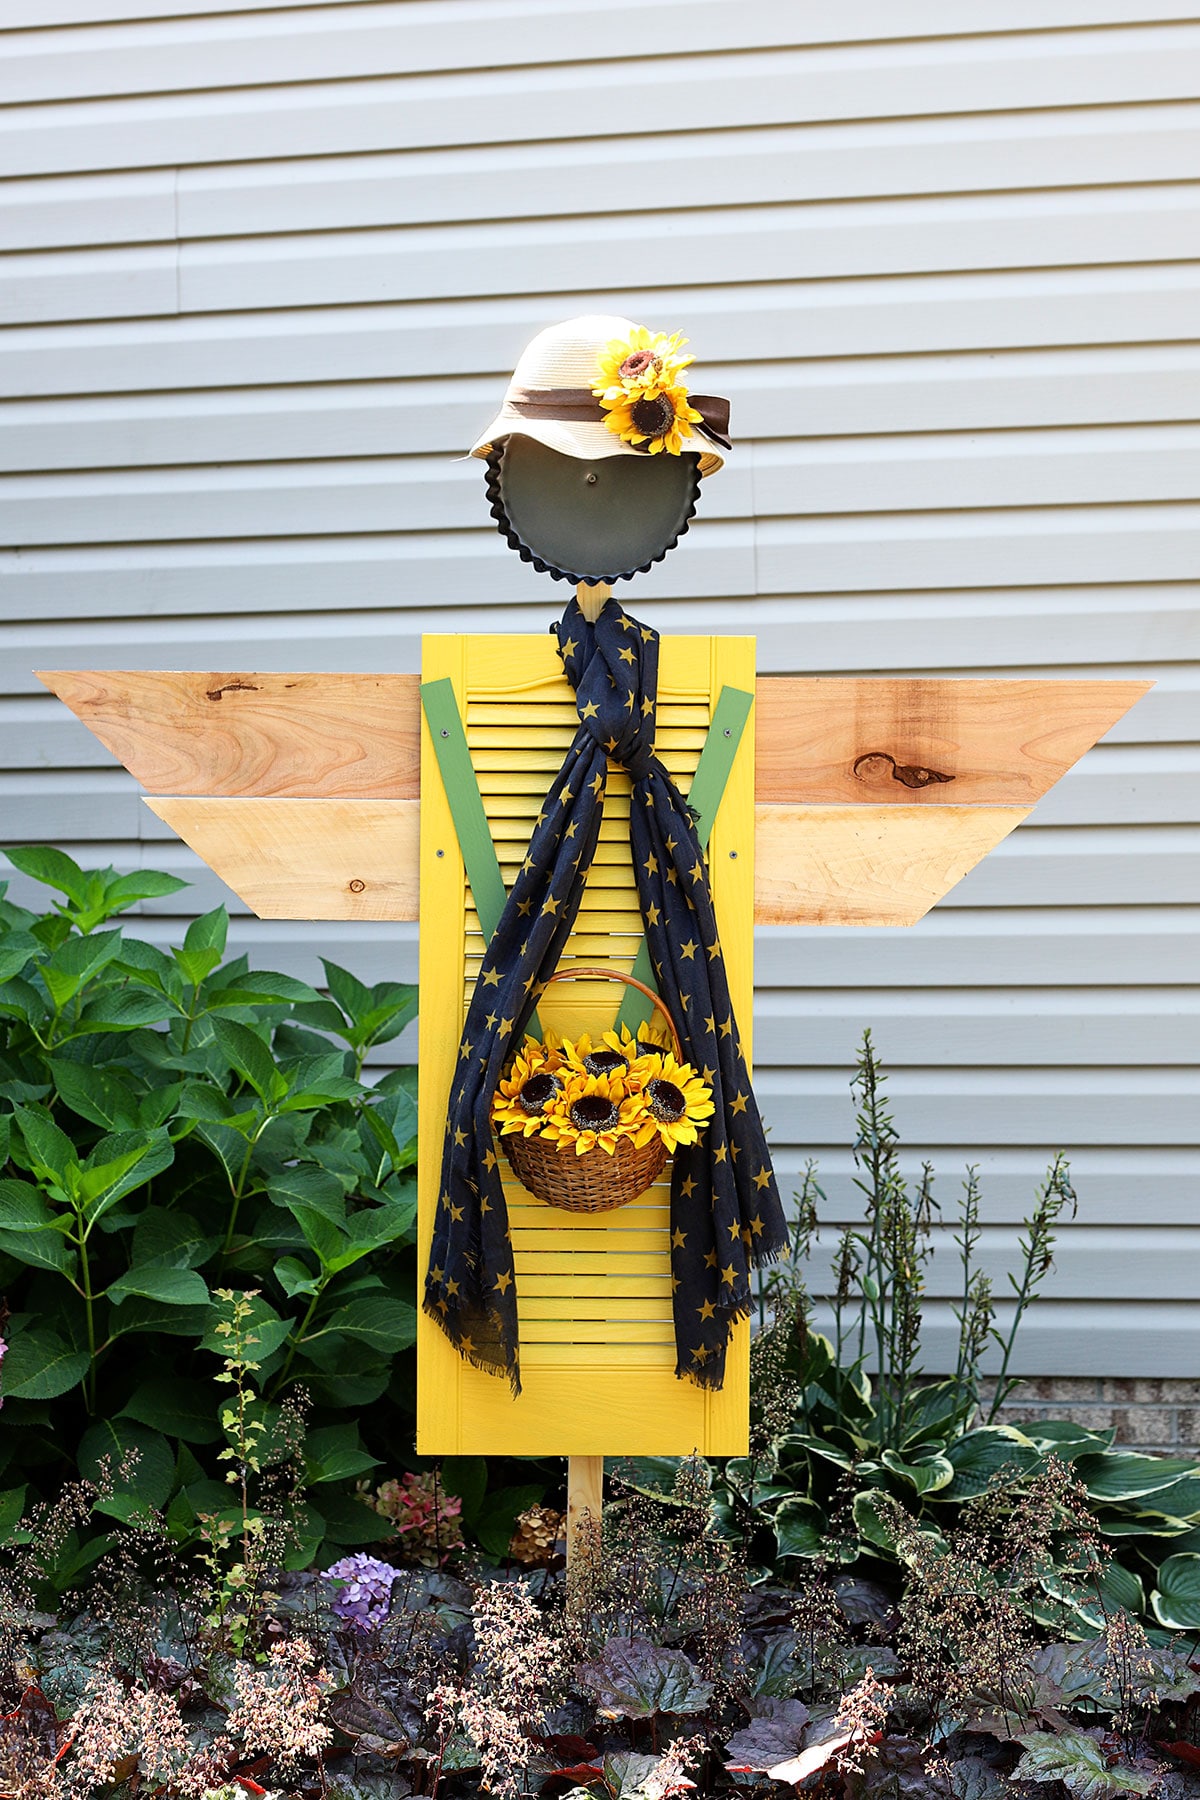 An bright yellow upcycled shutter made into a scarecrow - wearing a scarf and a hat covered in sunflowers and carrying a basket of sunflowers.